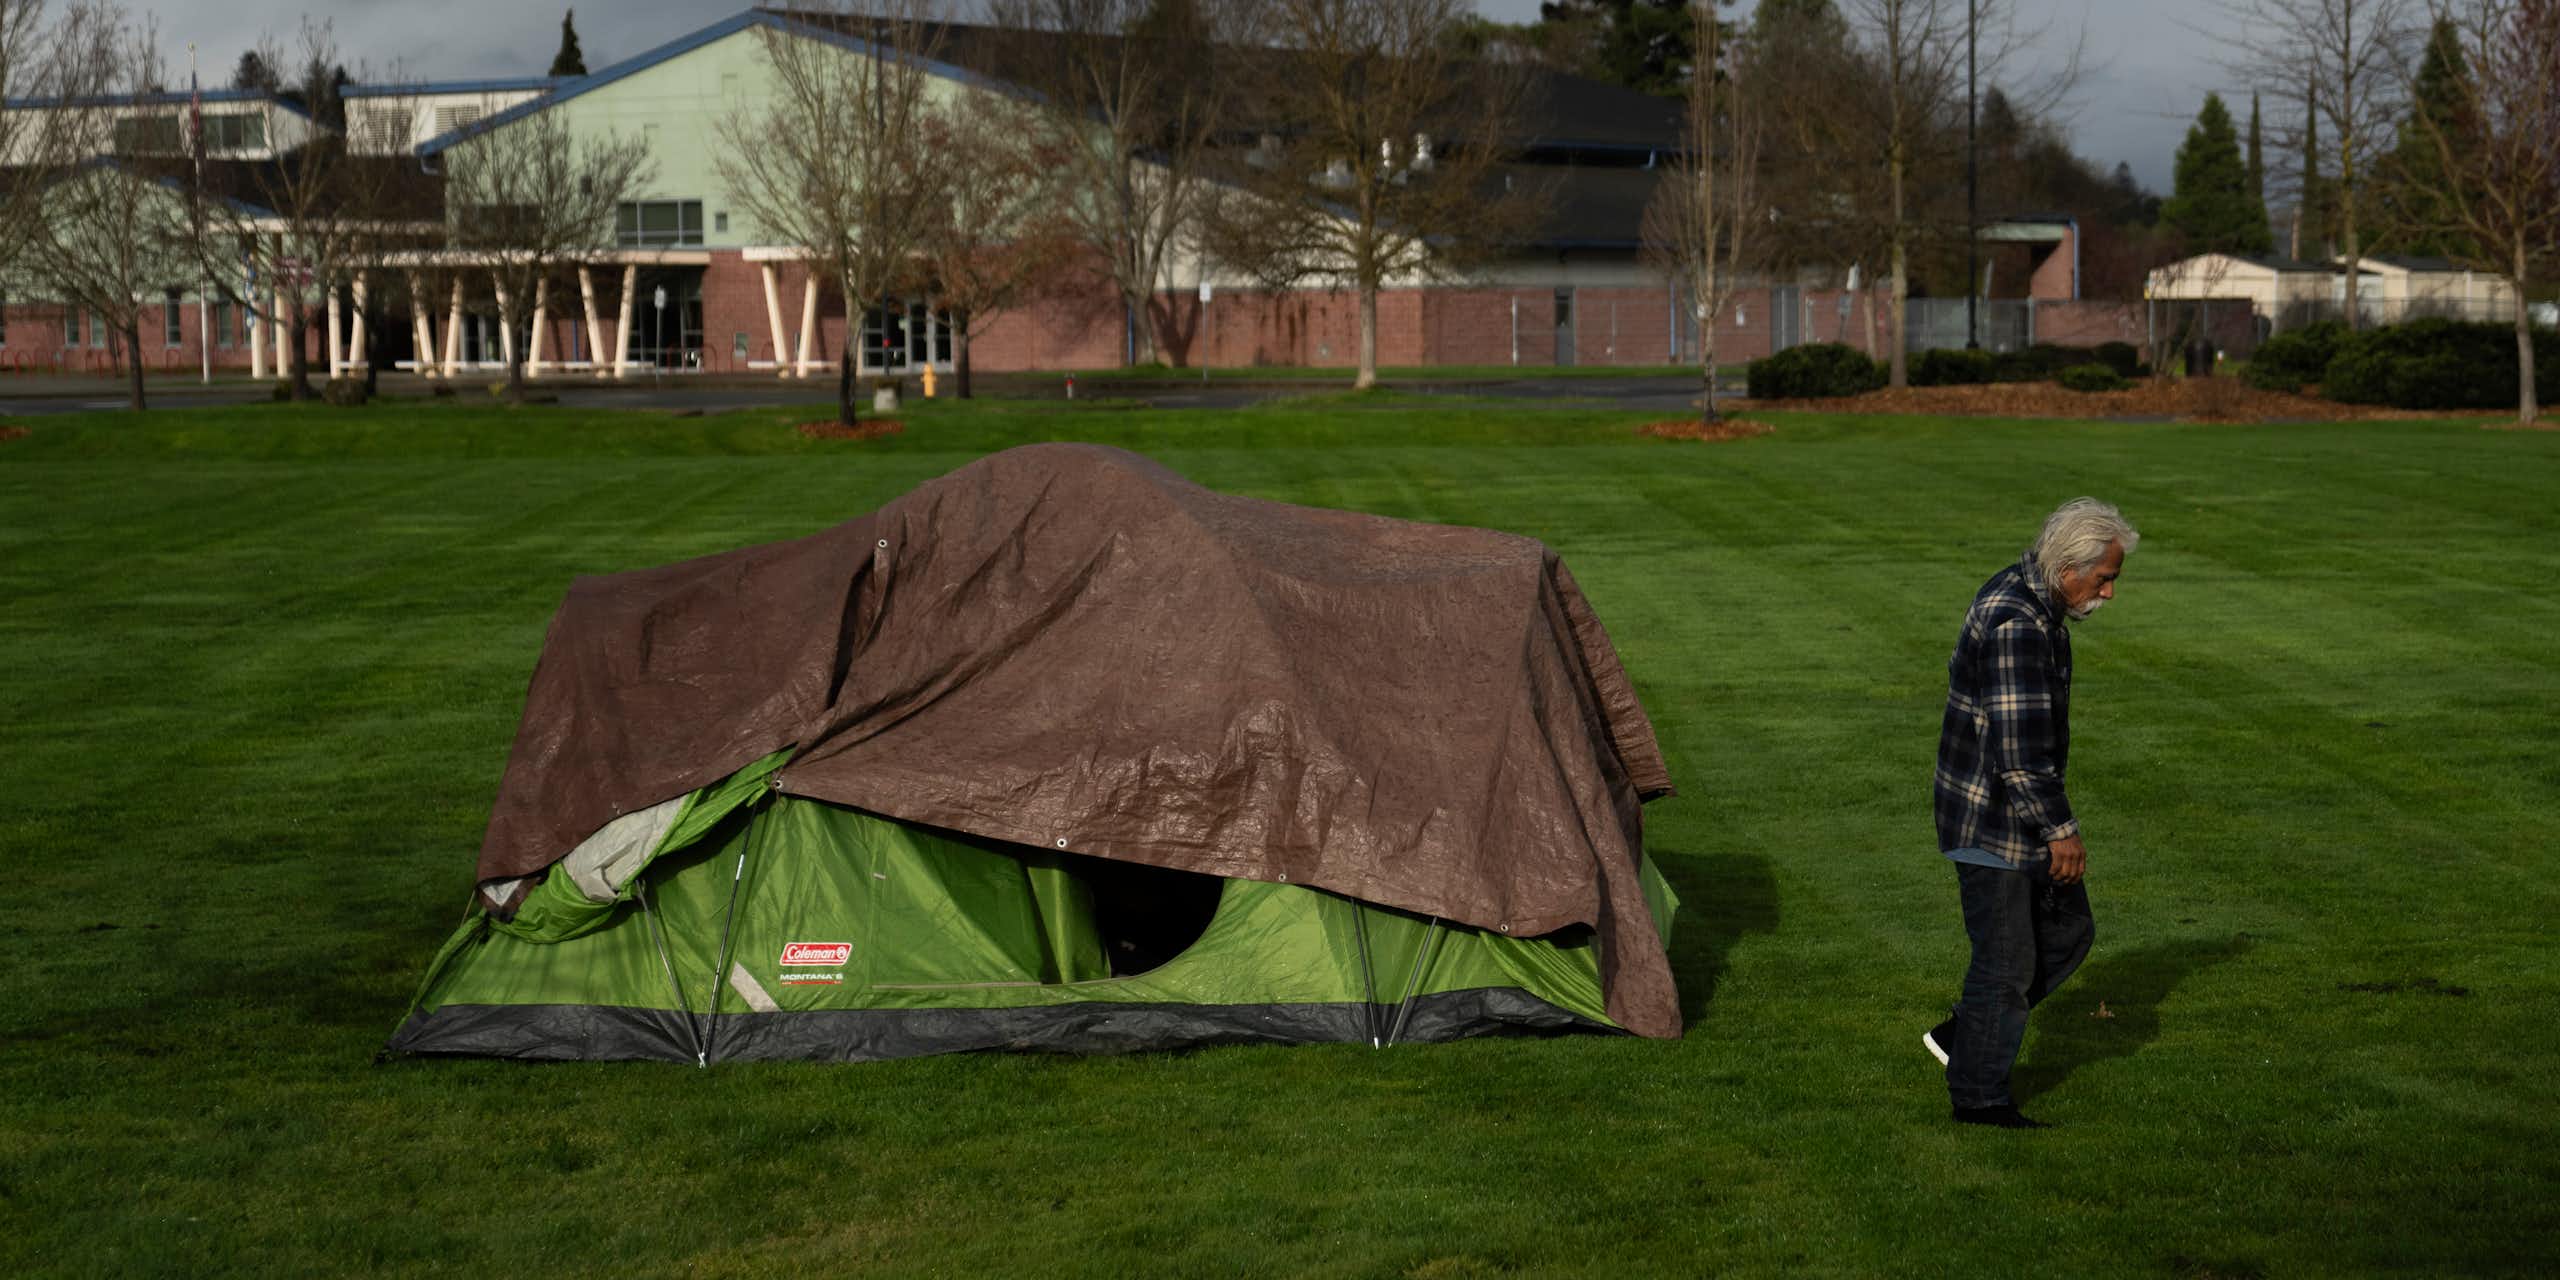 A man walks past a tent on a grassy field, with a school in the background